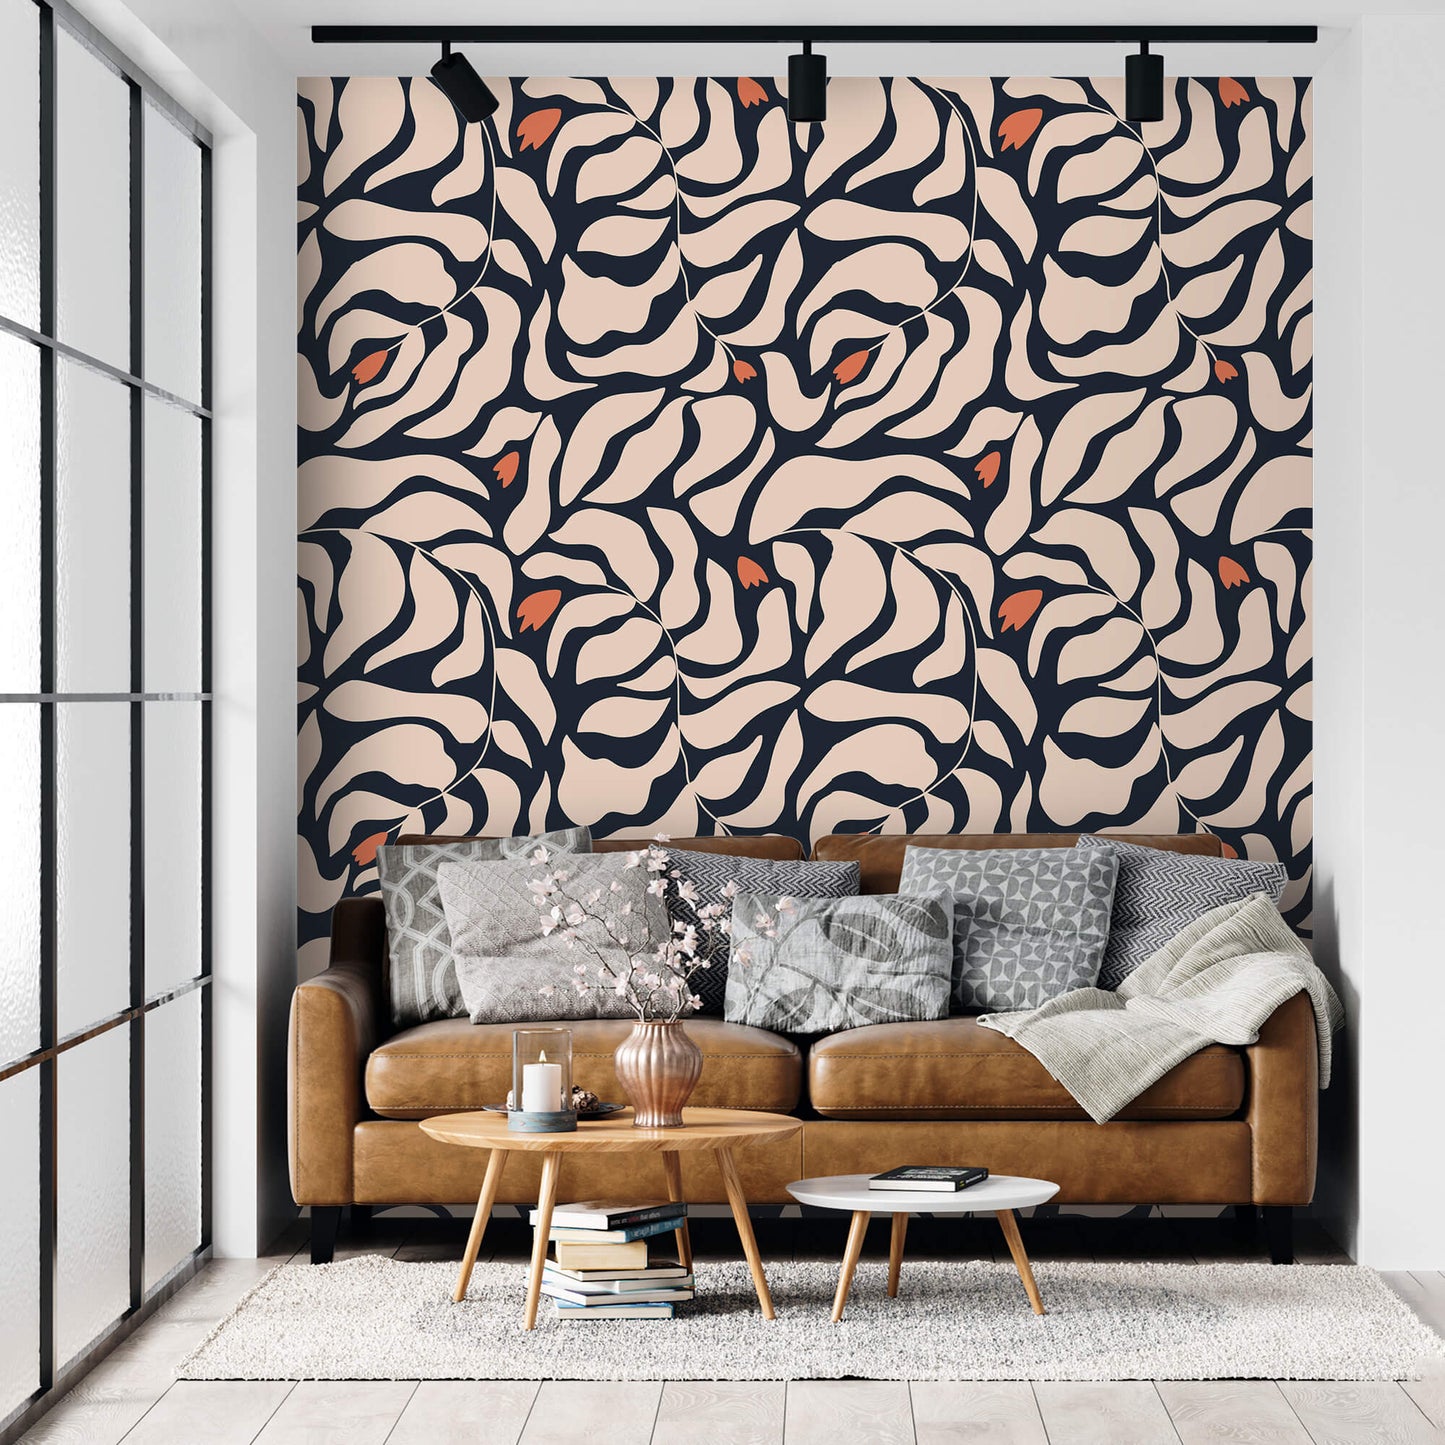 Botanical Extravaganza: Oversized Leaves and Flowers Wallpaper